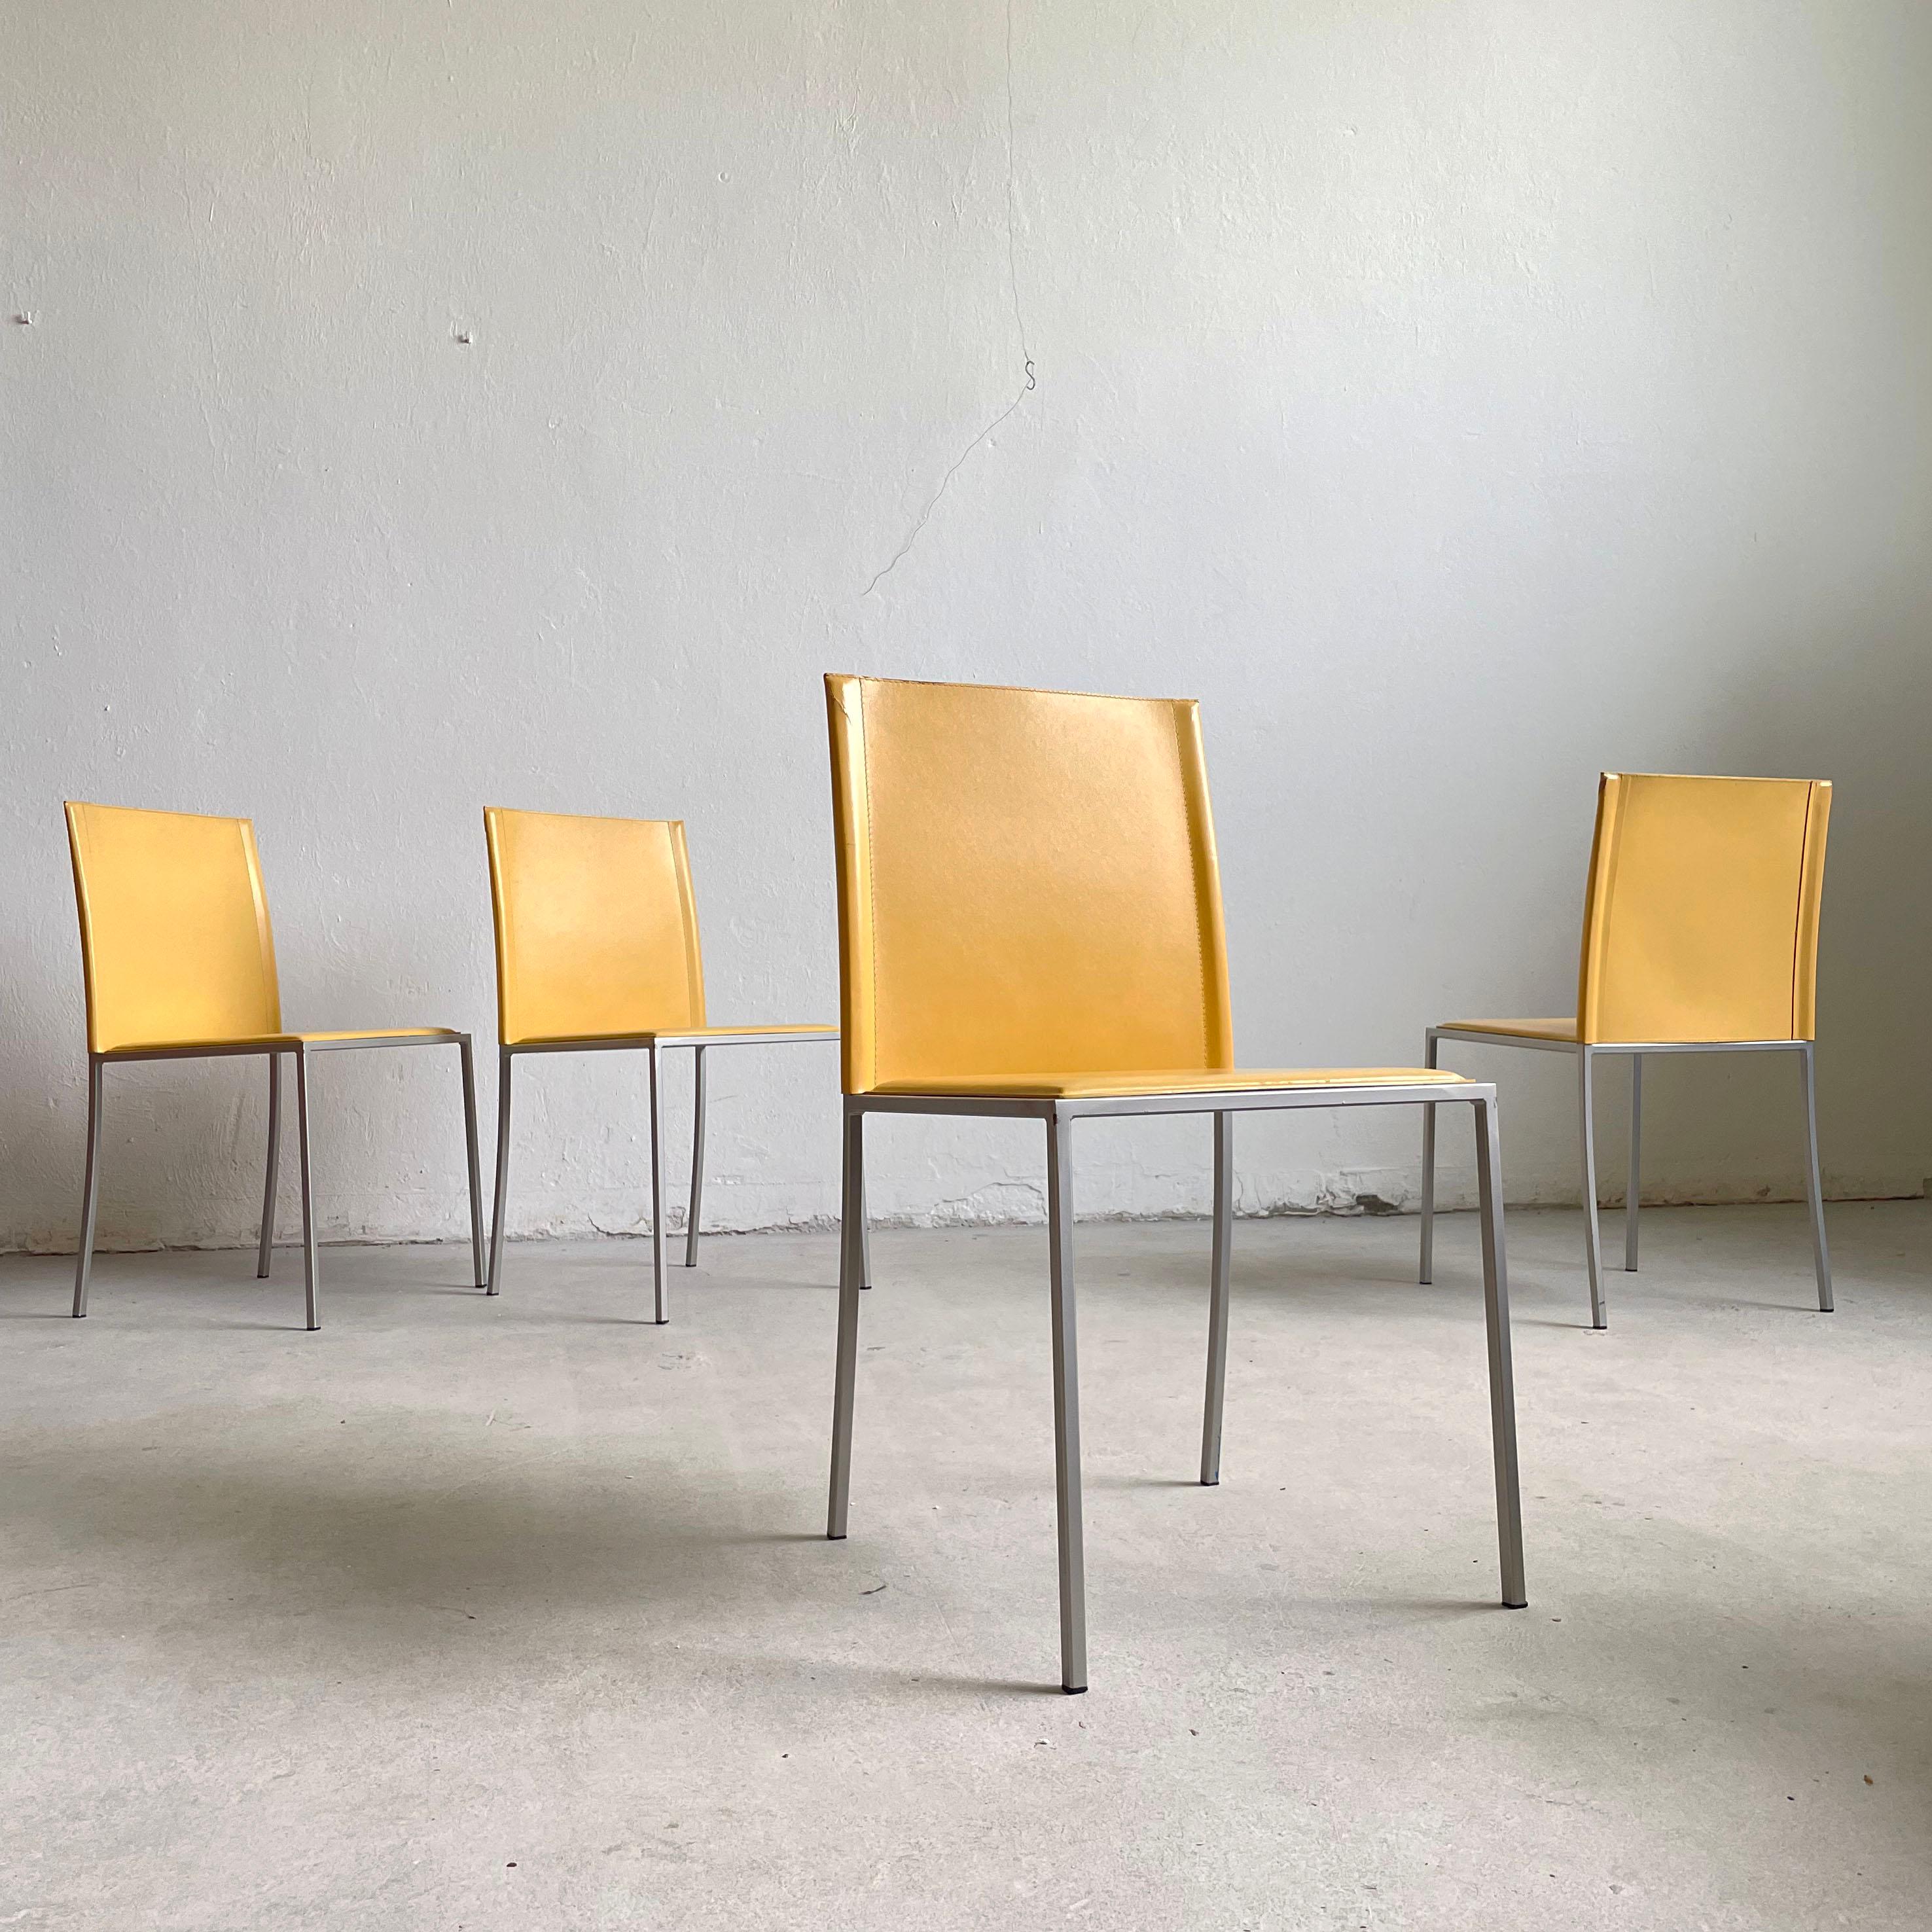 Set of 4 leather dining chairs produced in Italy in the 1990's by Calligaris

Elegant minimalist design. The chairs feature sturdy minimalist powder-coated metal frame and seats upholstered in high quality Italian leather in yellow color 

The